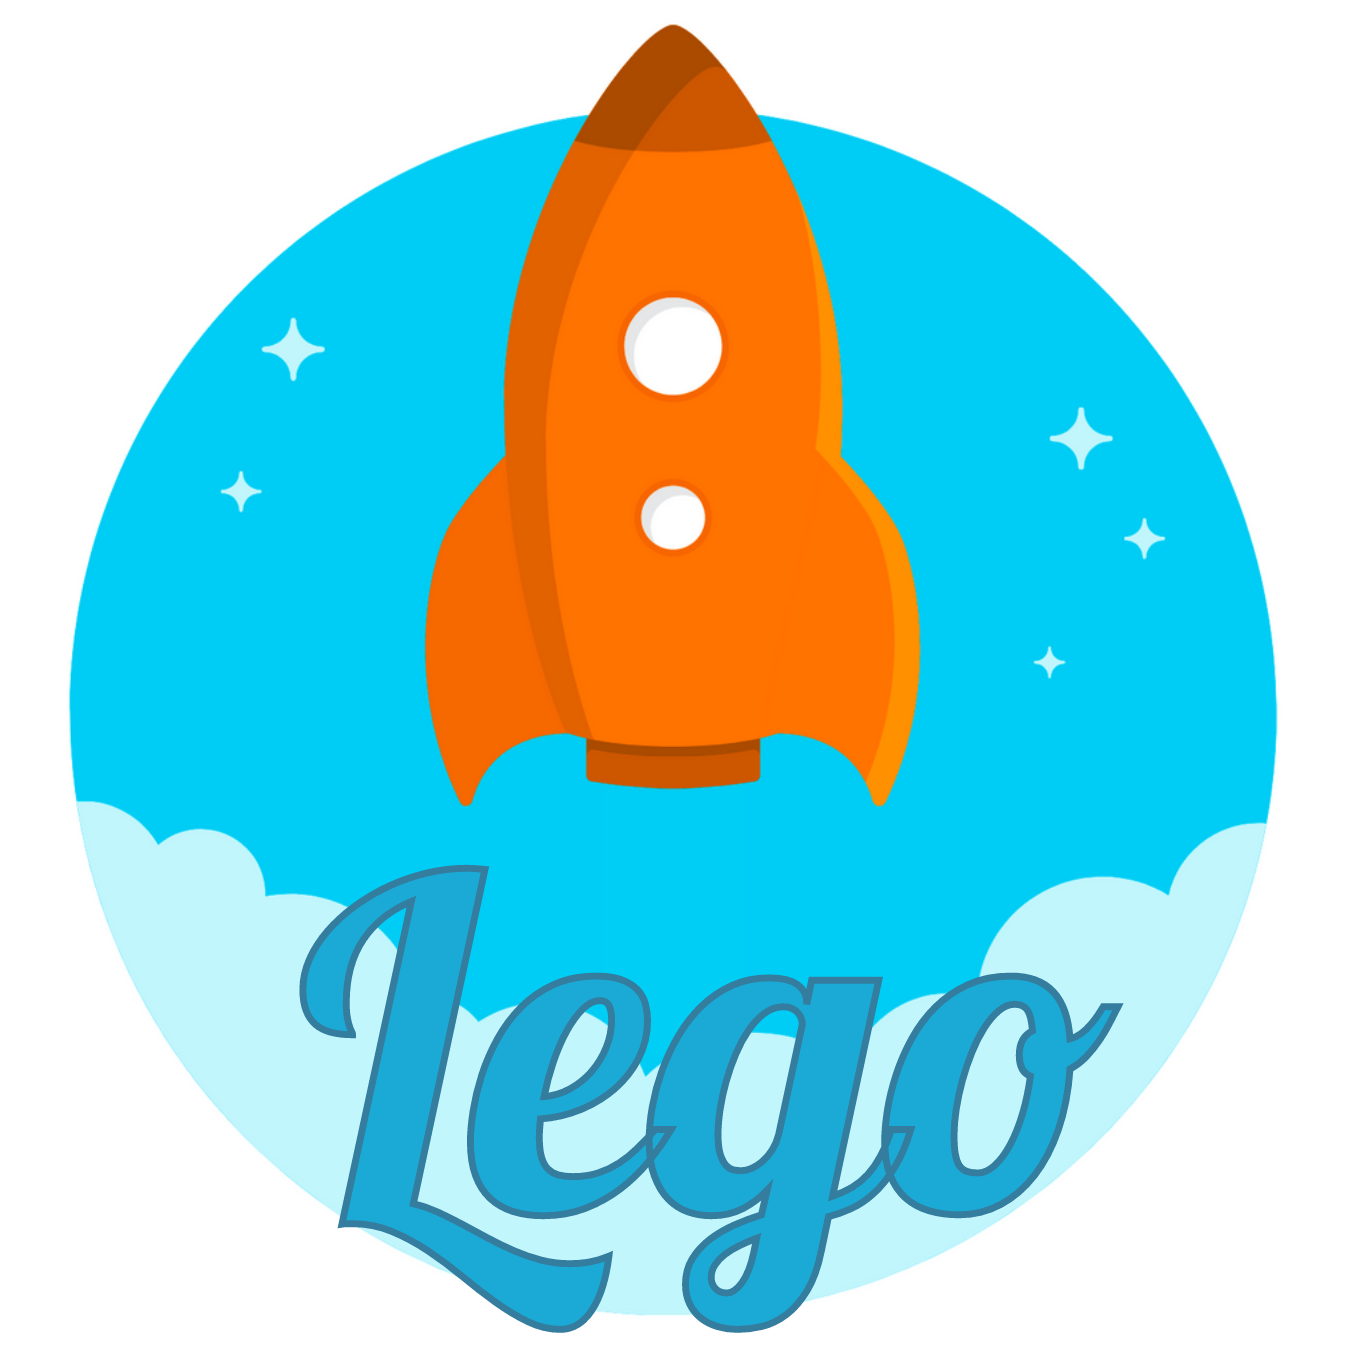 Lego is a fast web-components library